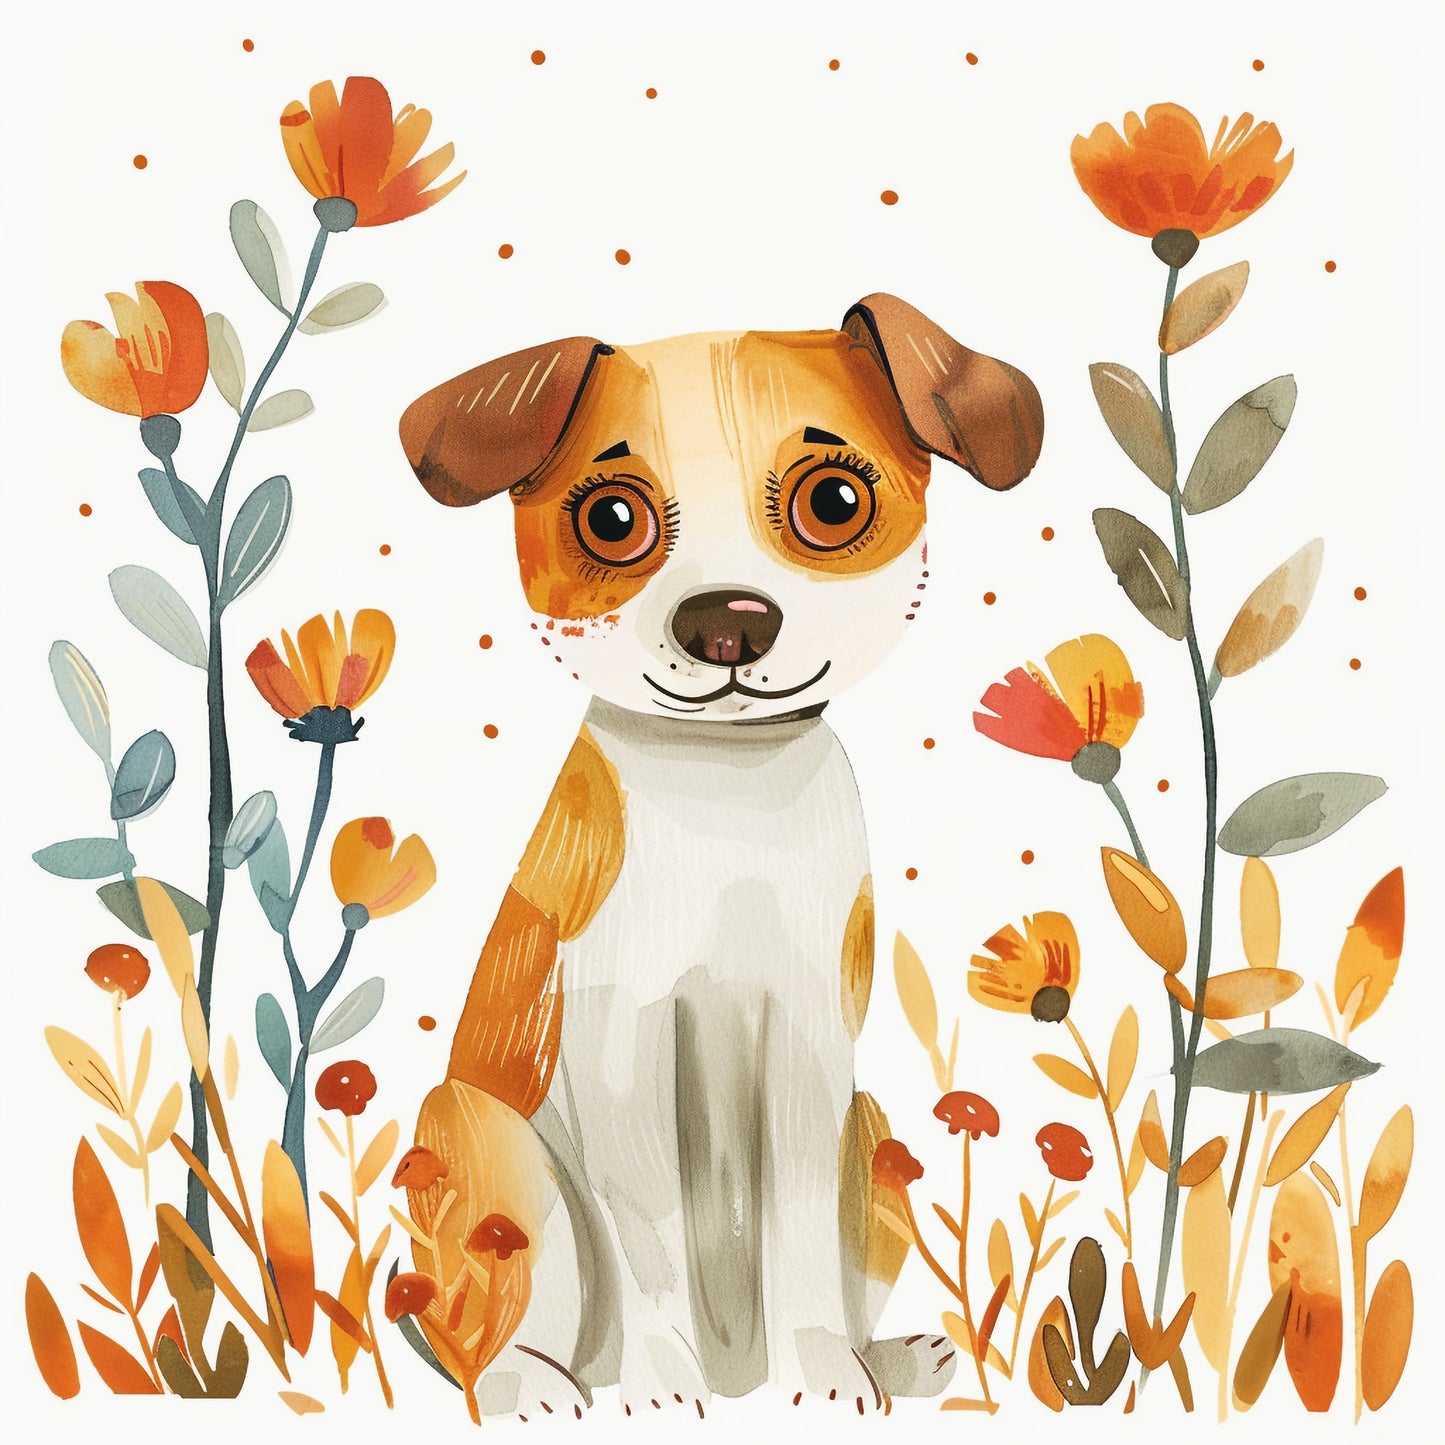 Charming Watercolor Illustration of a Cute Dog with Flowers